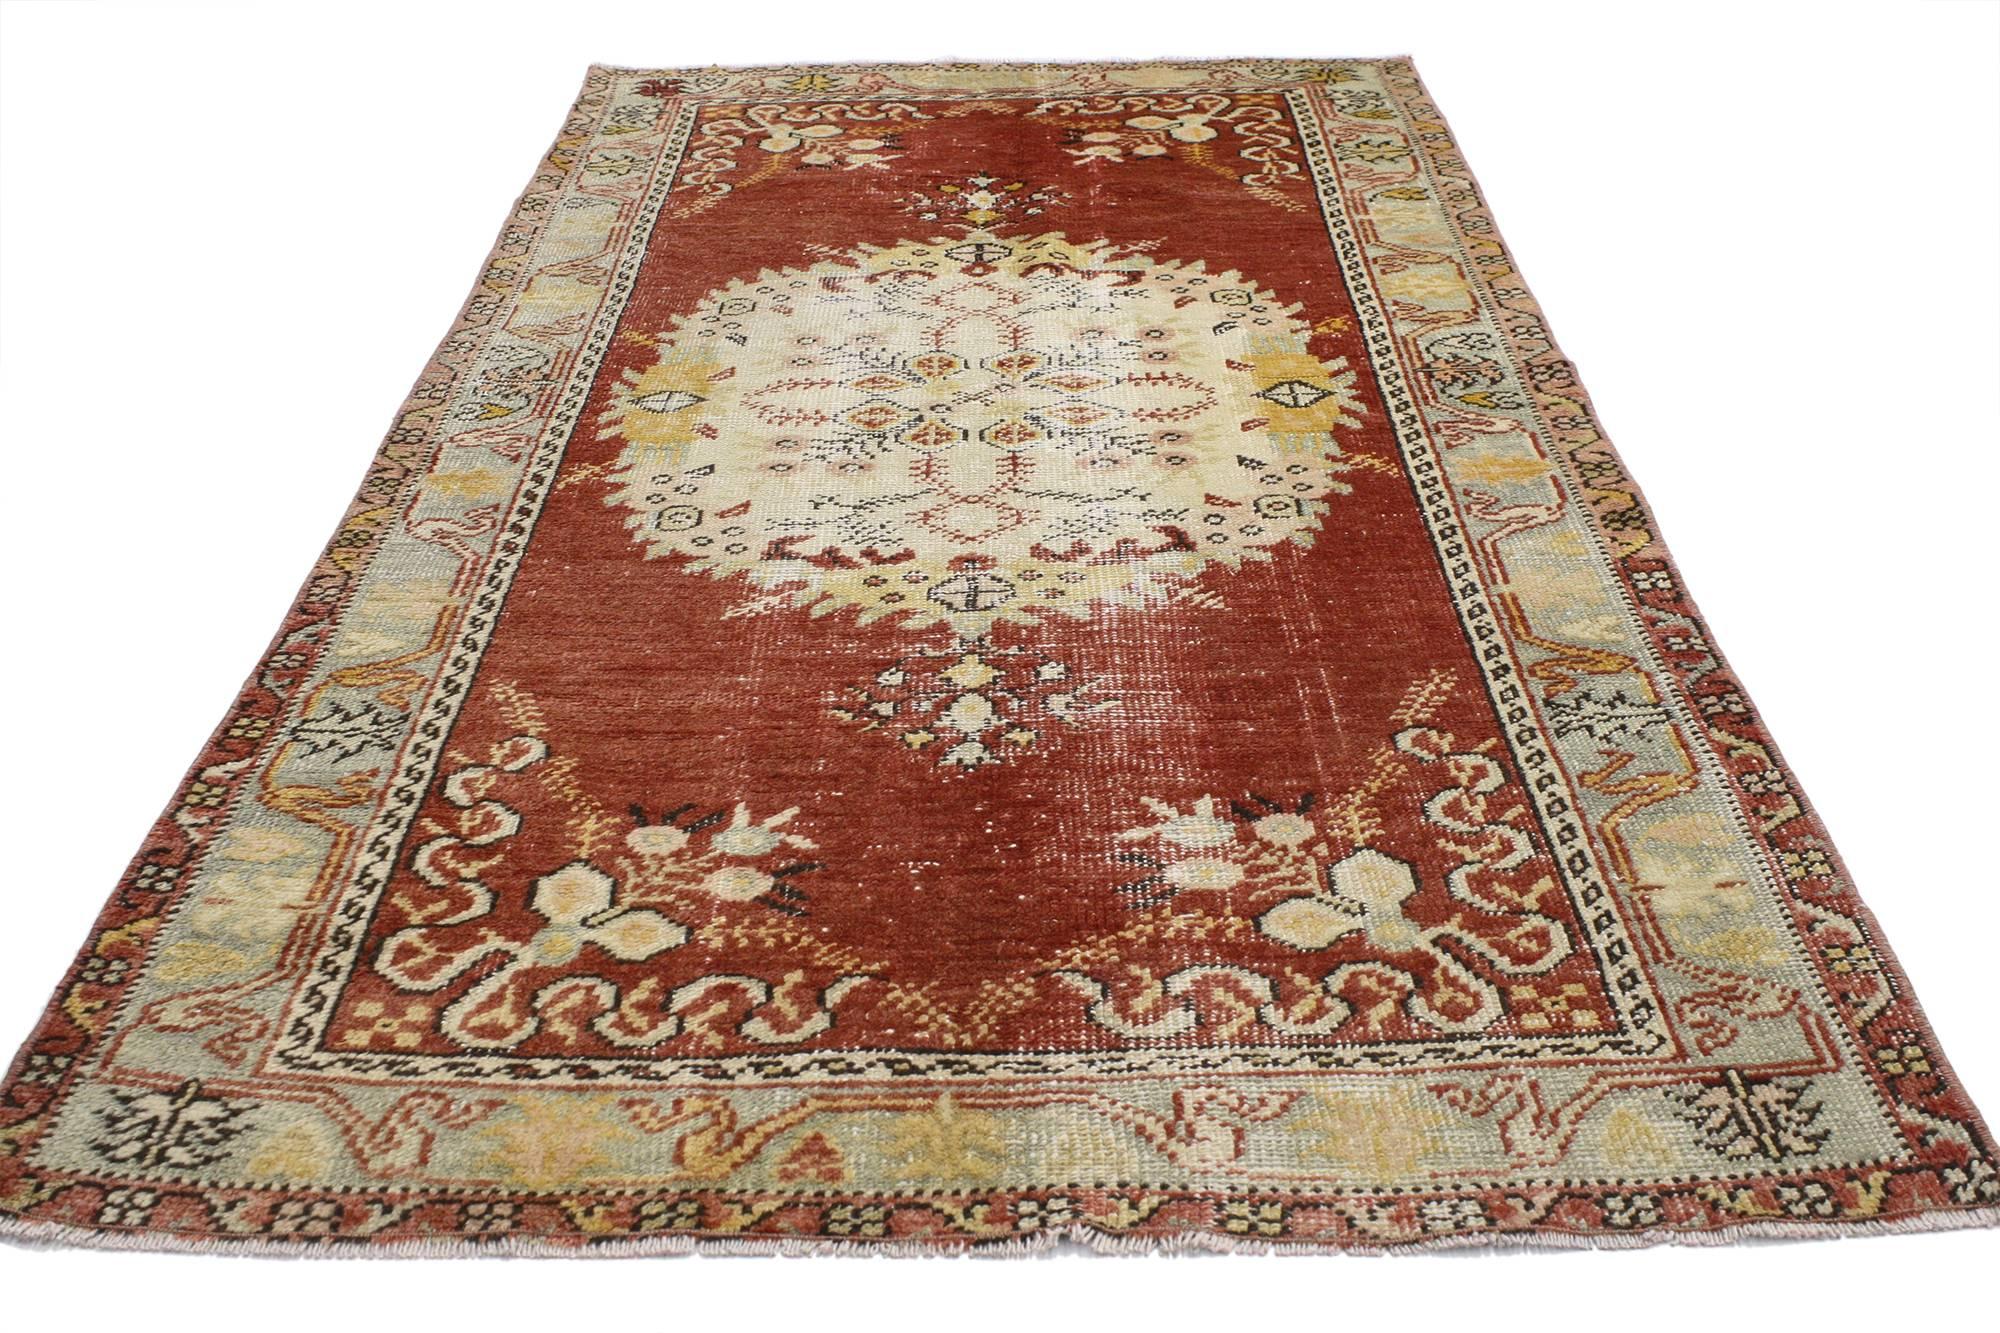 52083, Rustic style distressed vintage Turkish Oushak rug, kitchen, foyer or entry rug. This vintage Turkish Oushak rug features a modern rustic style. Immersed in Anatolian history and refined colors, this distressed vintage Oushak rug combines